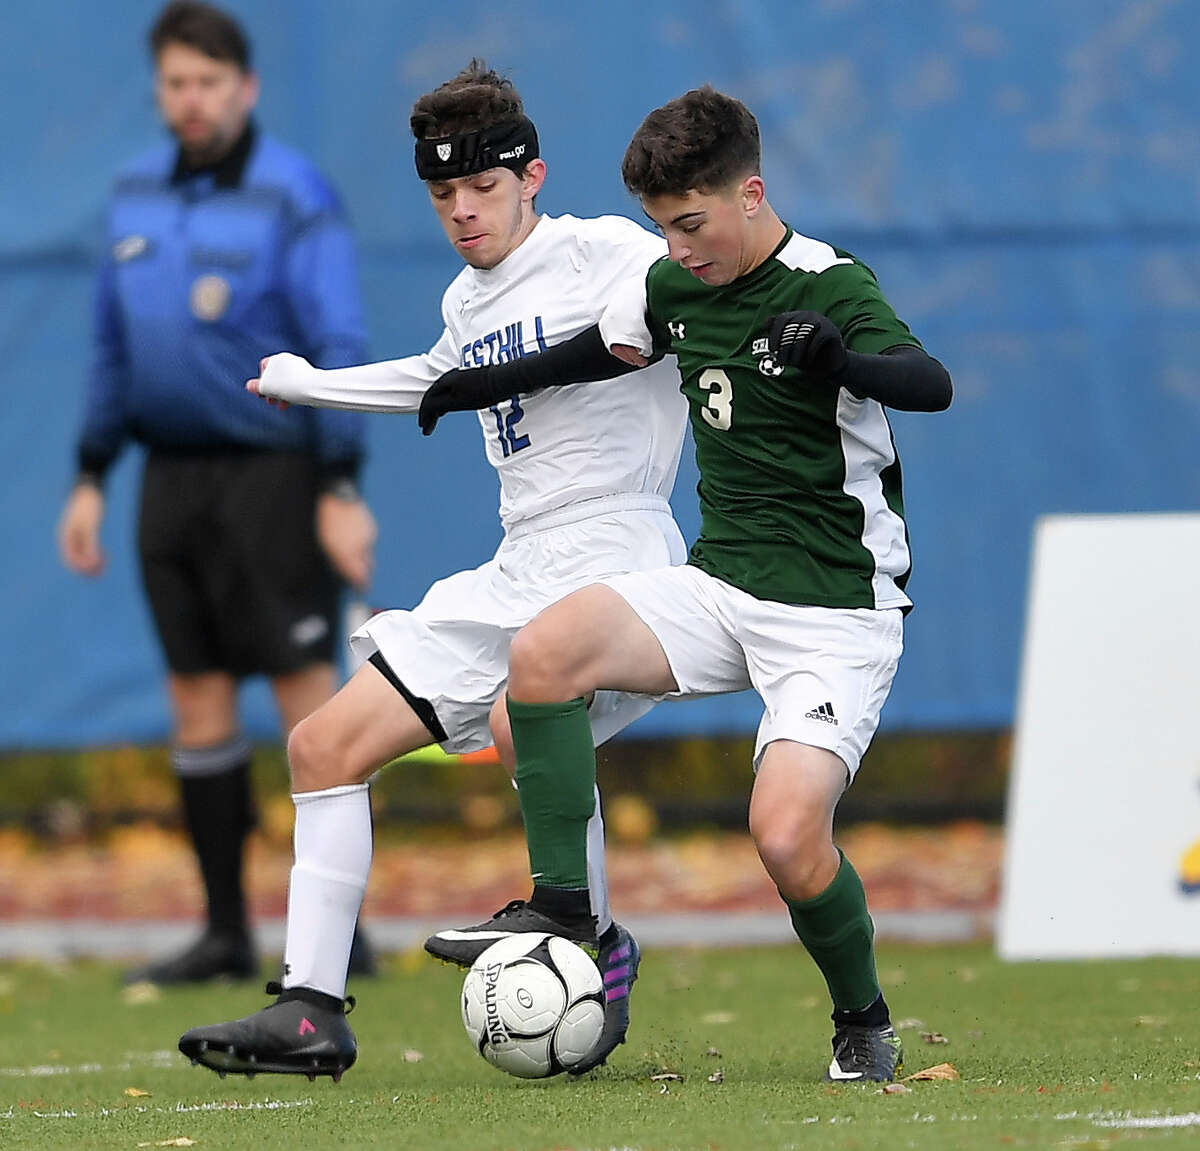 Schalmont?’s Zach Metzold, right, shields the ball from Westhill?’s Braden Krzykowski during a Class B semifinal at the NYSPHSAA Boys Soccer Championships in Middletown, N.Y., Saturday, Nov. 10, 2018. Schalmont's season ended with a 3-1 loss to Westhill-III. (Adrian Kraus / Special to the Times Union)